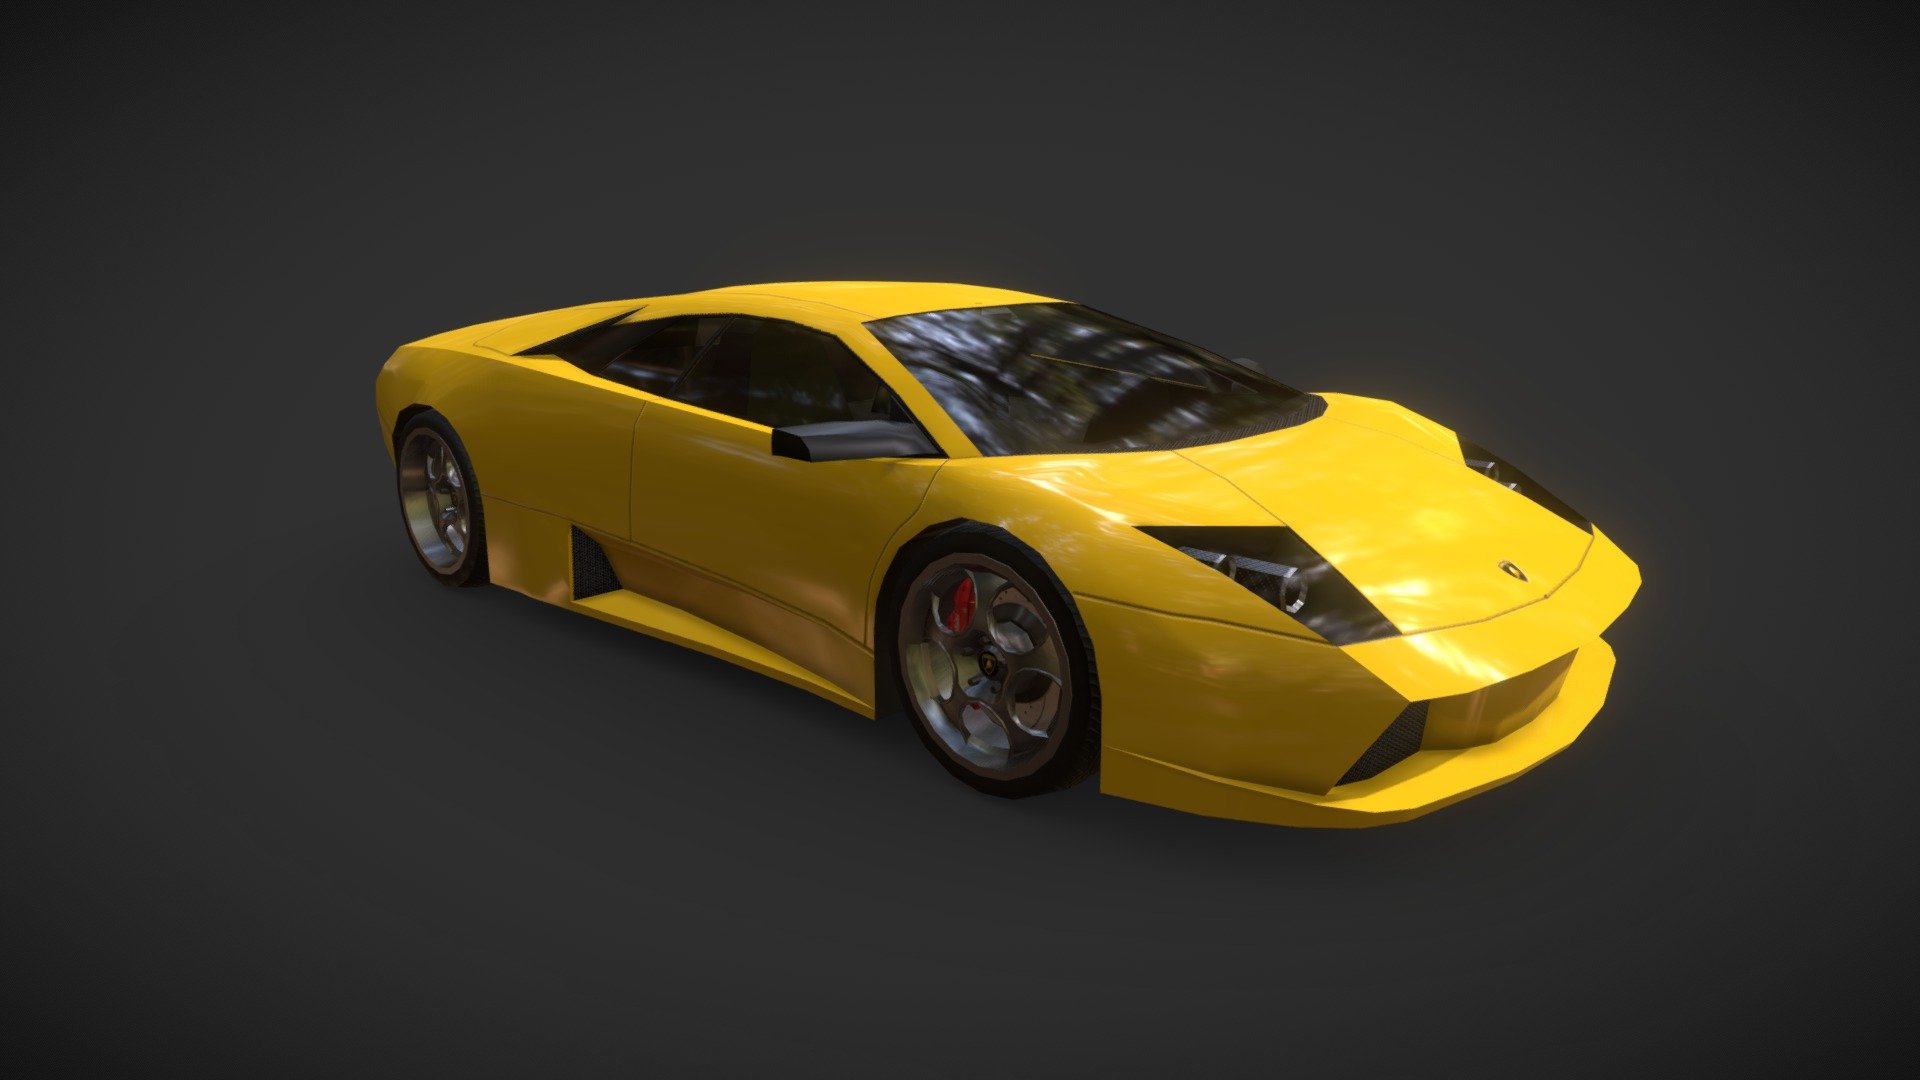 Low Poly Lamborghini Murcielago LP-640. this one is my practice car to study and learn modeling in 3D softwares. I'll made this car co many time in various 3d softwares 3d model